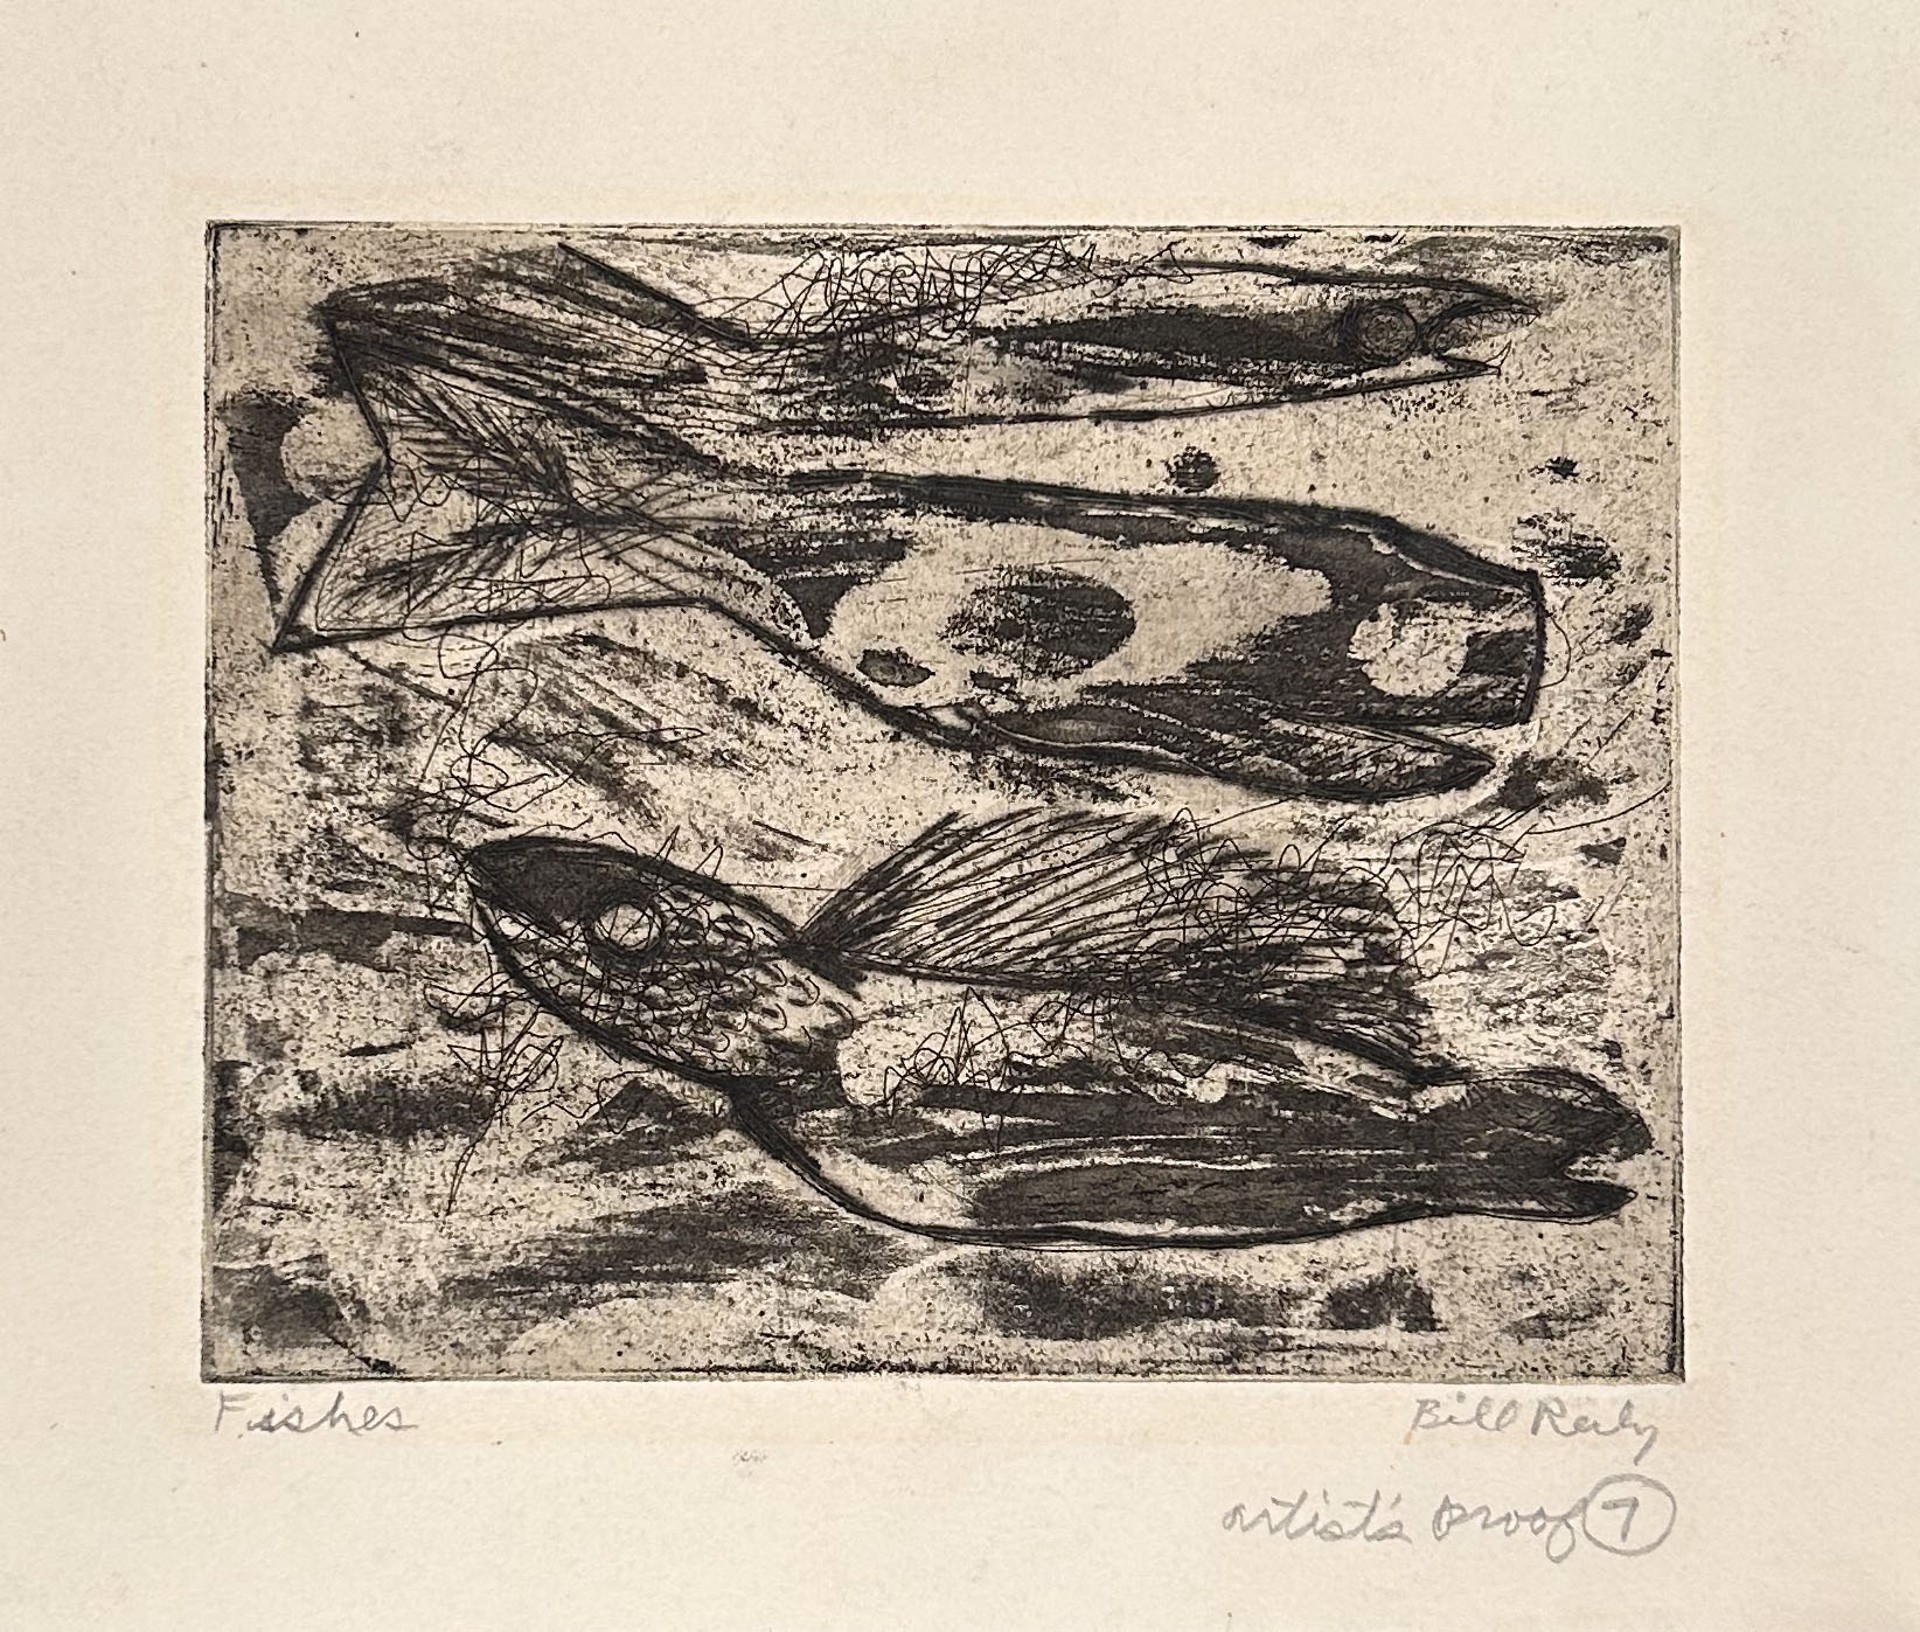 7. Fishes (Artist's proof) by Bill Reily Prints